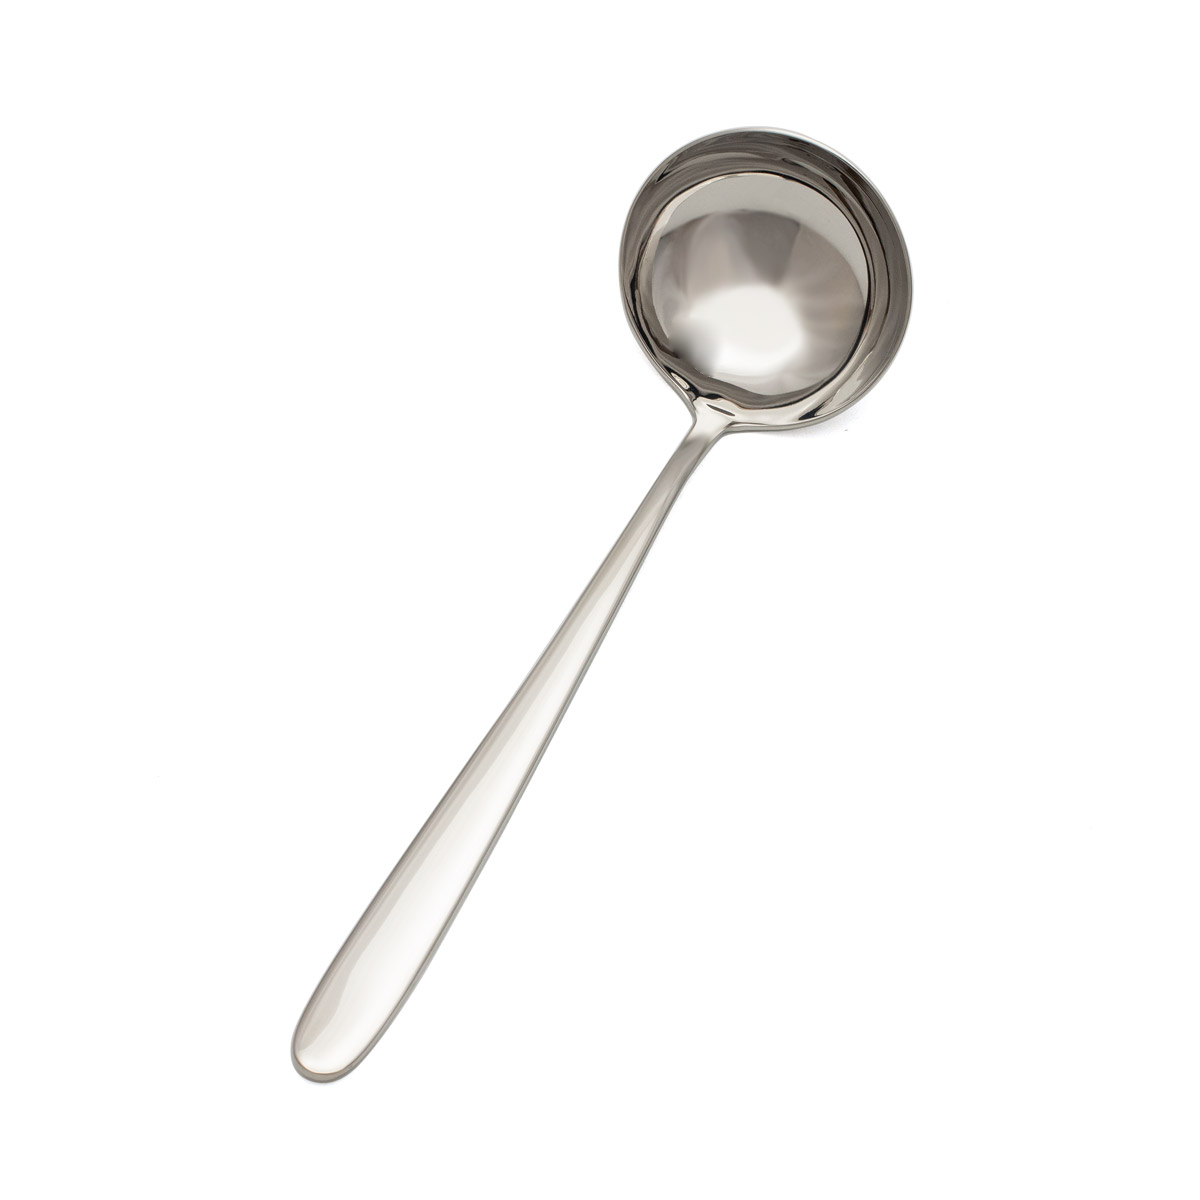 Proud+Stainless+Steel+Kitchen+Pouring+Spoon+%7C+1+Pcs